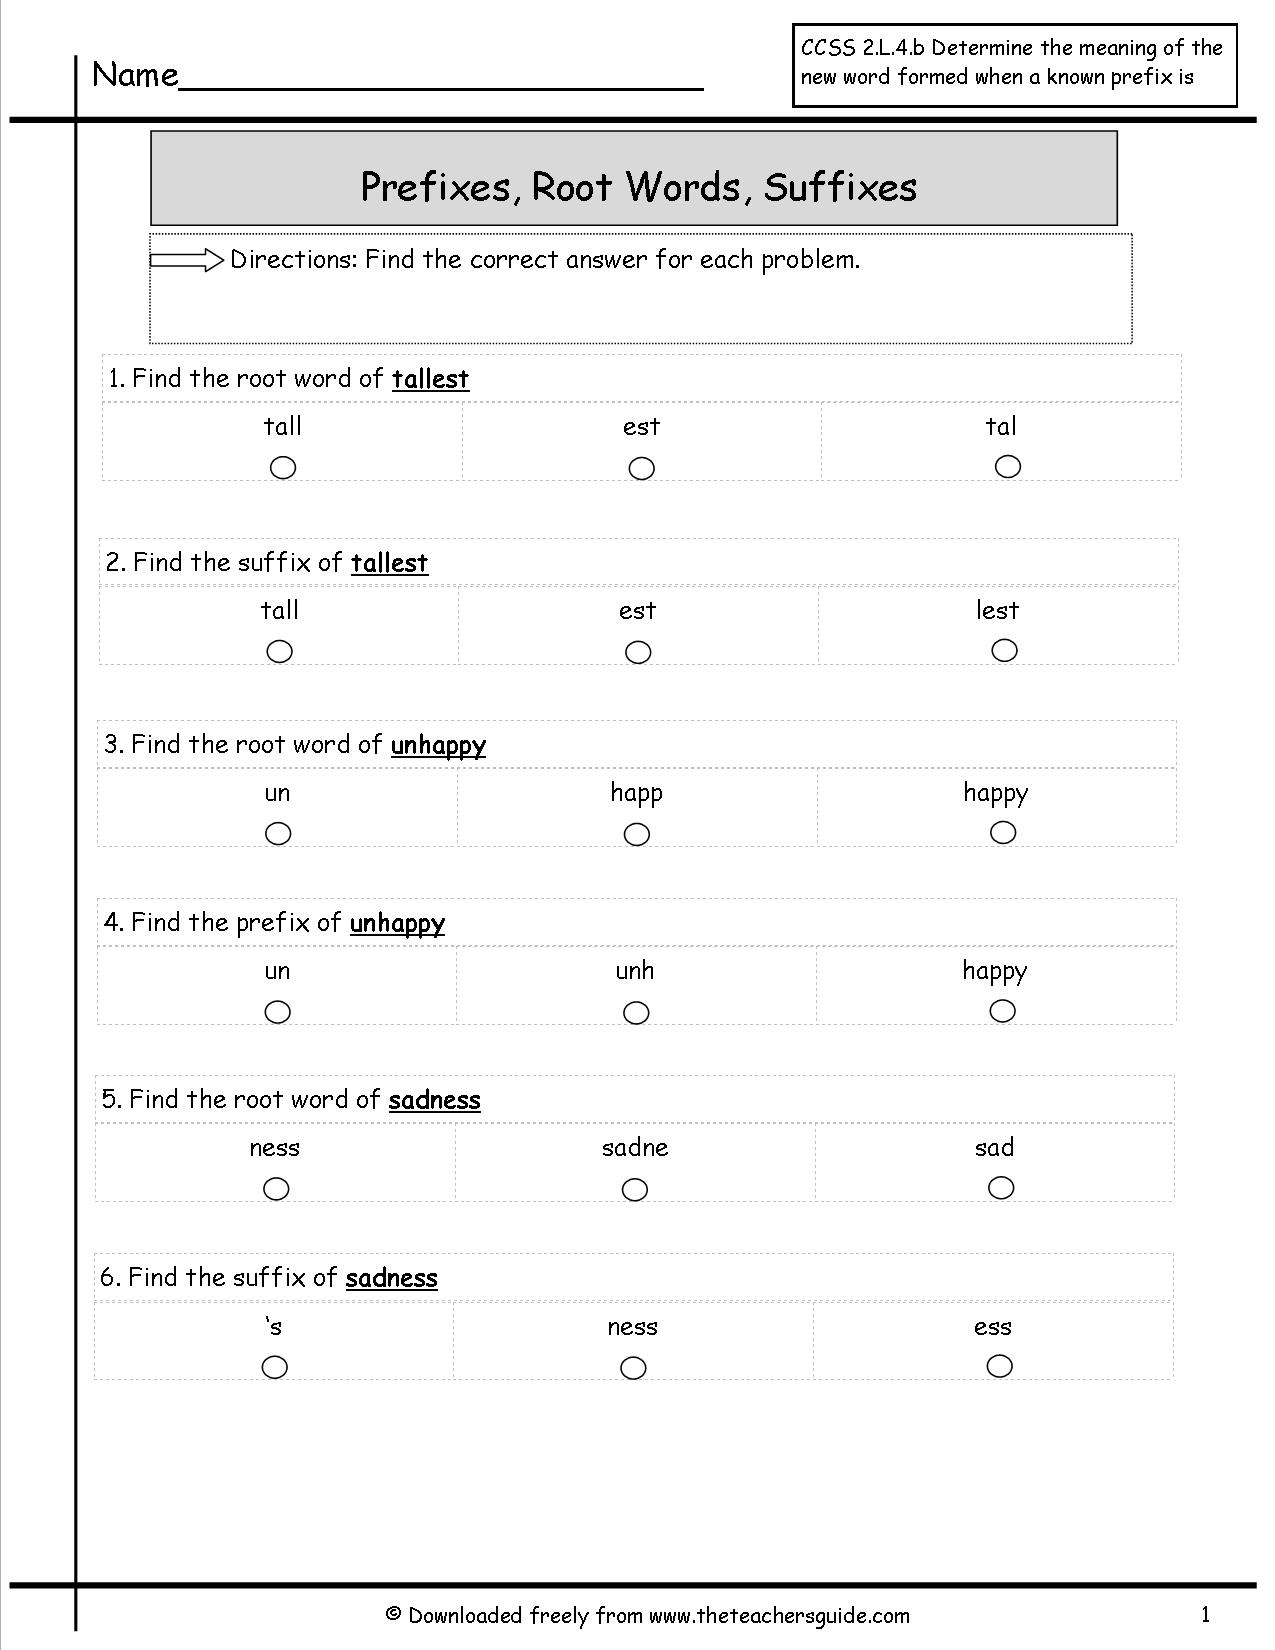 ROOT-WORDS Prefix and Suffix Worksheets Image